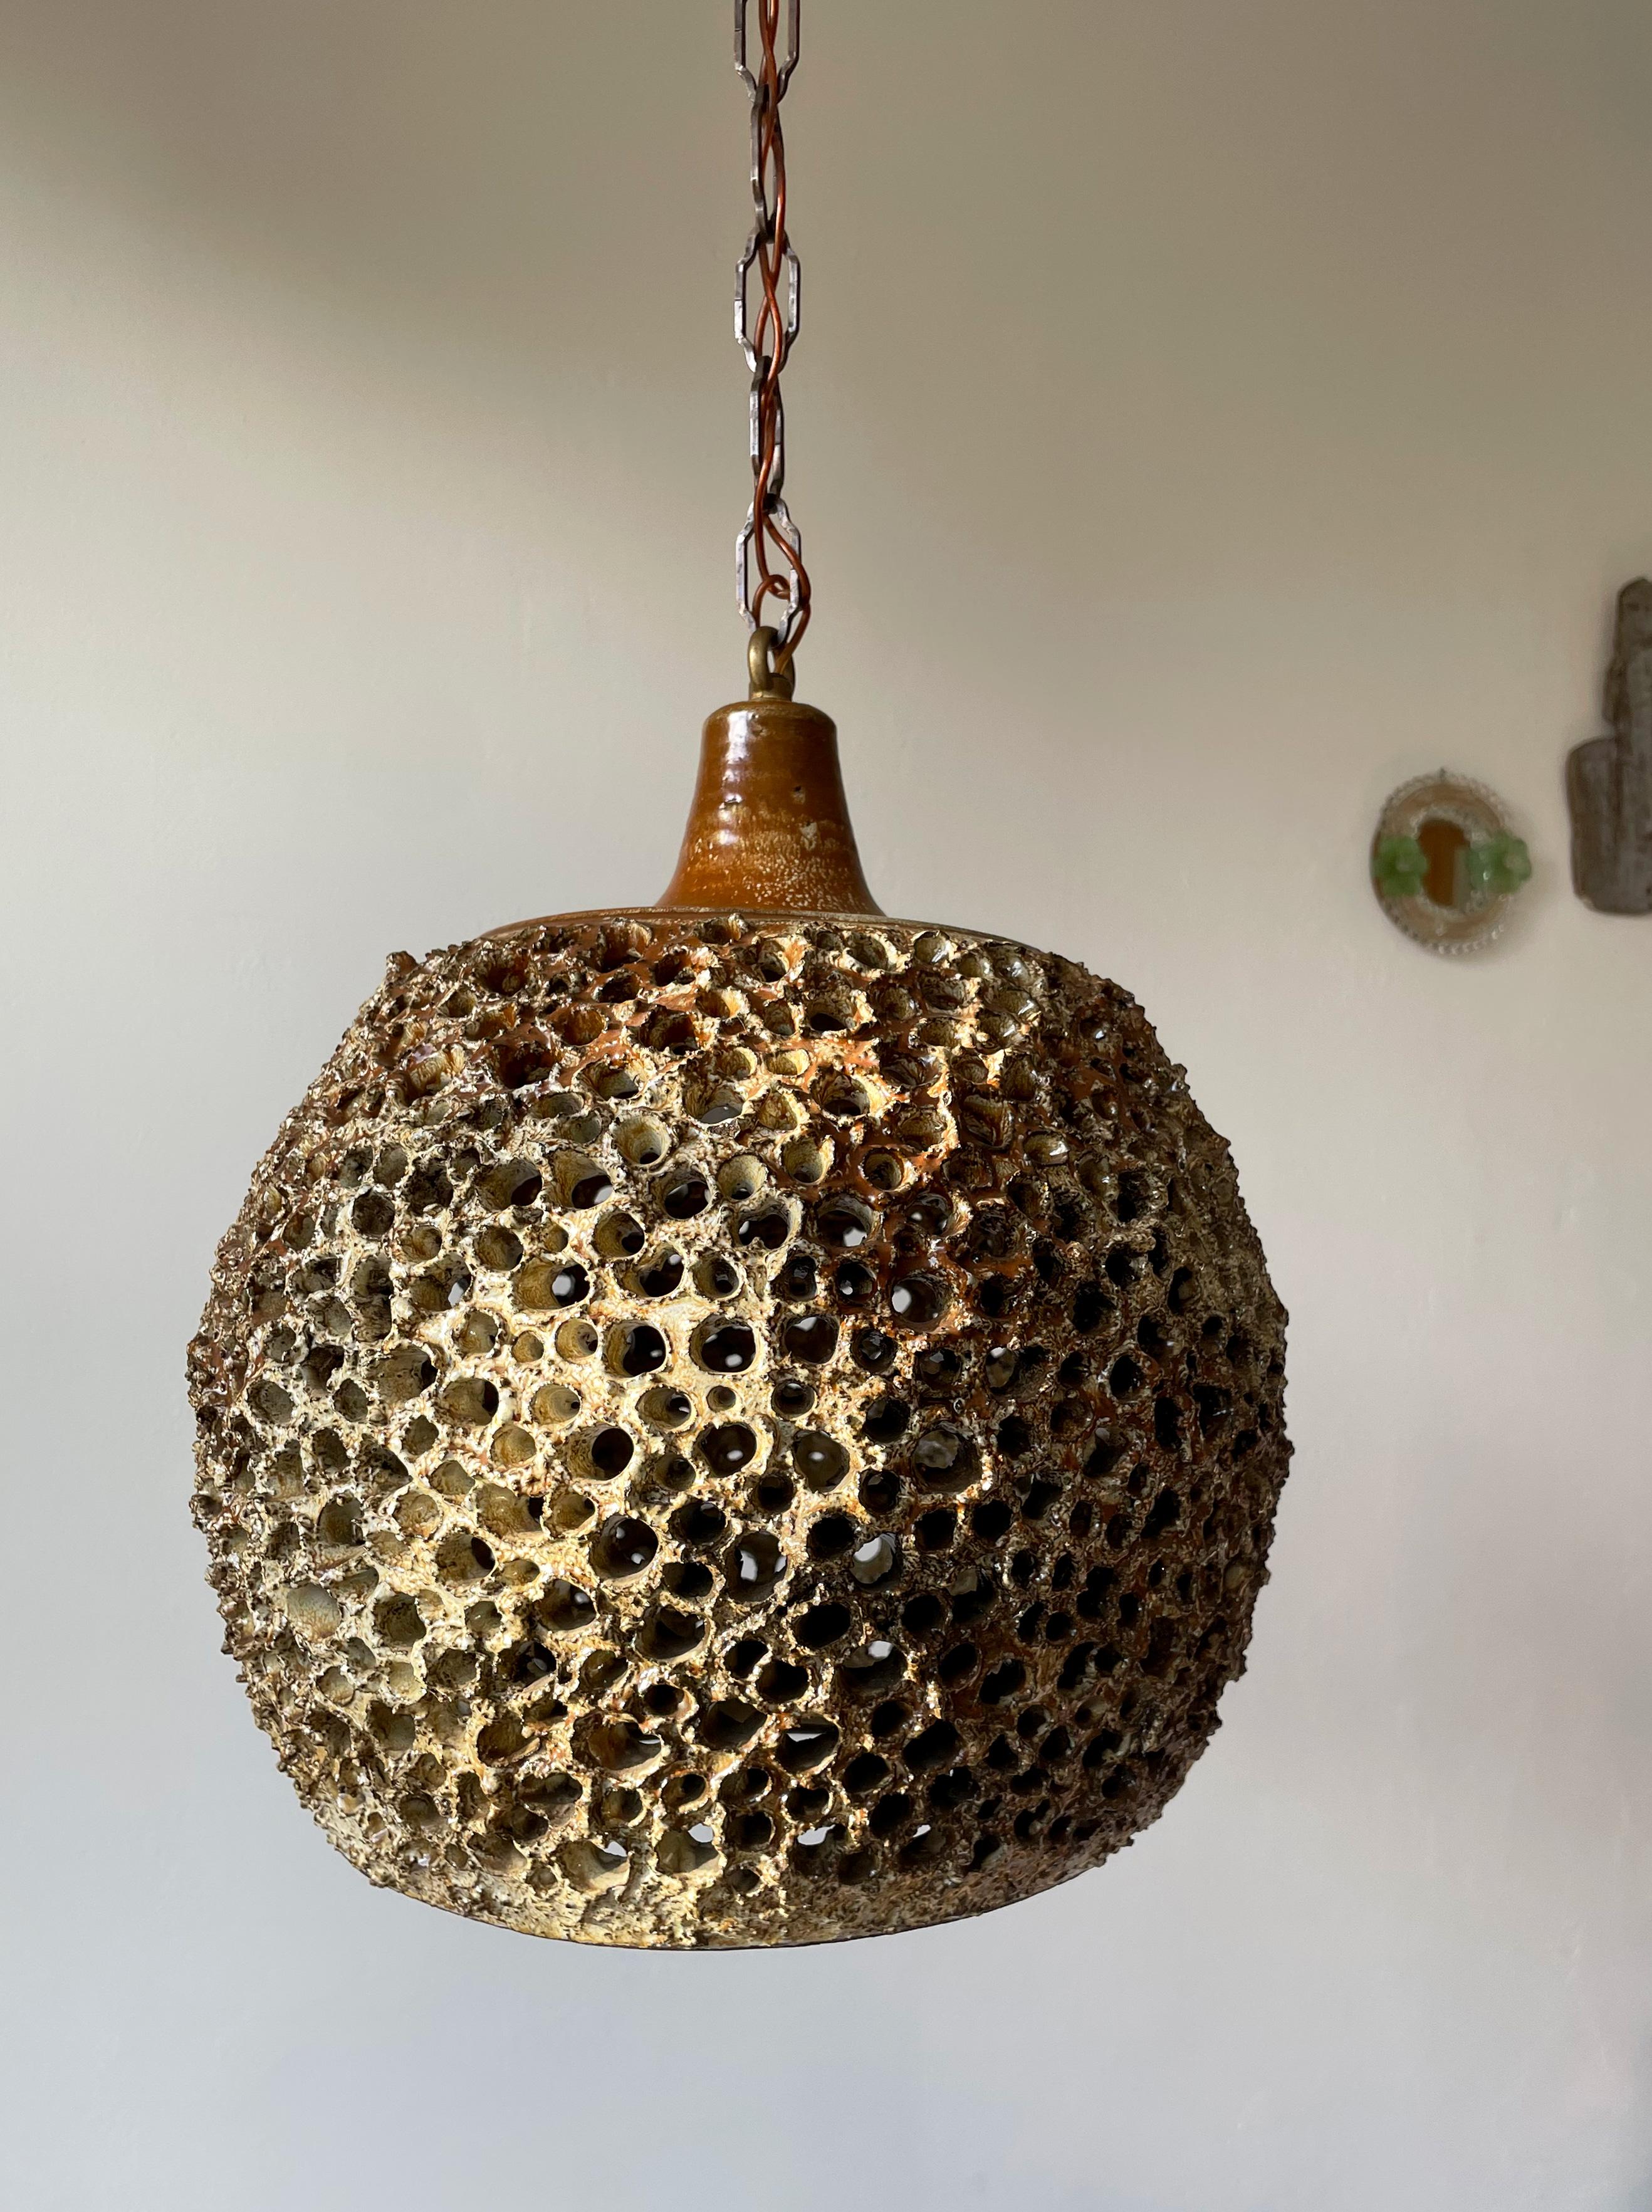 Large, unique and striking example of Scandinavian ceramic artistry! Danish Mid-Century Modern organically shaped, perforated ceramic pendant by Sejer Keramikfabrik. Manufactured on the Danish island of Funen in the 1960s as part of a limited